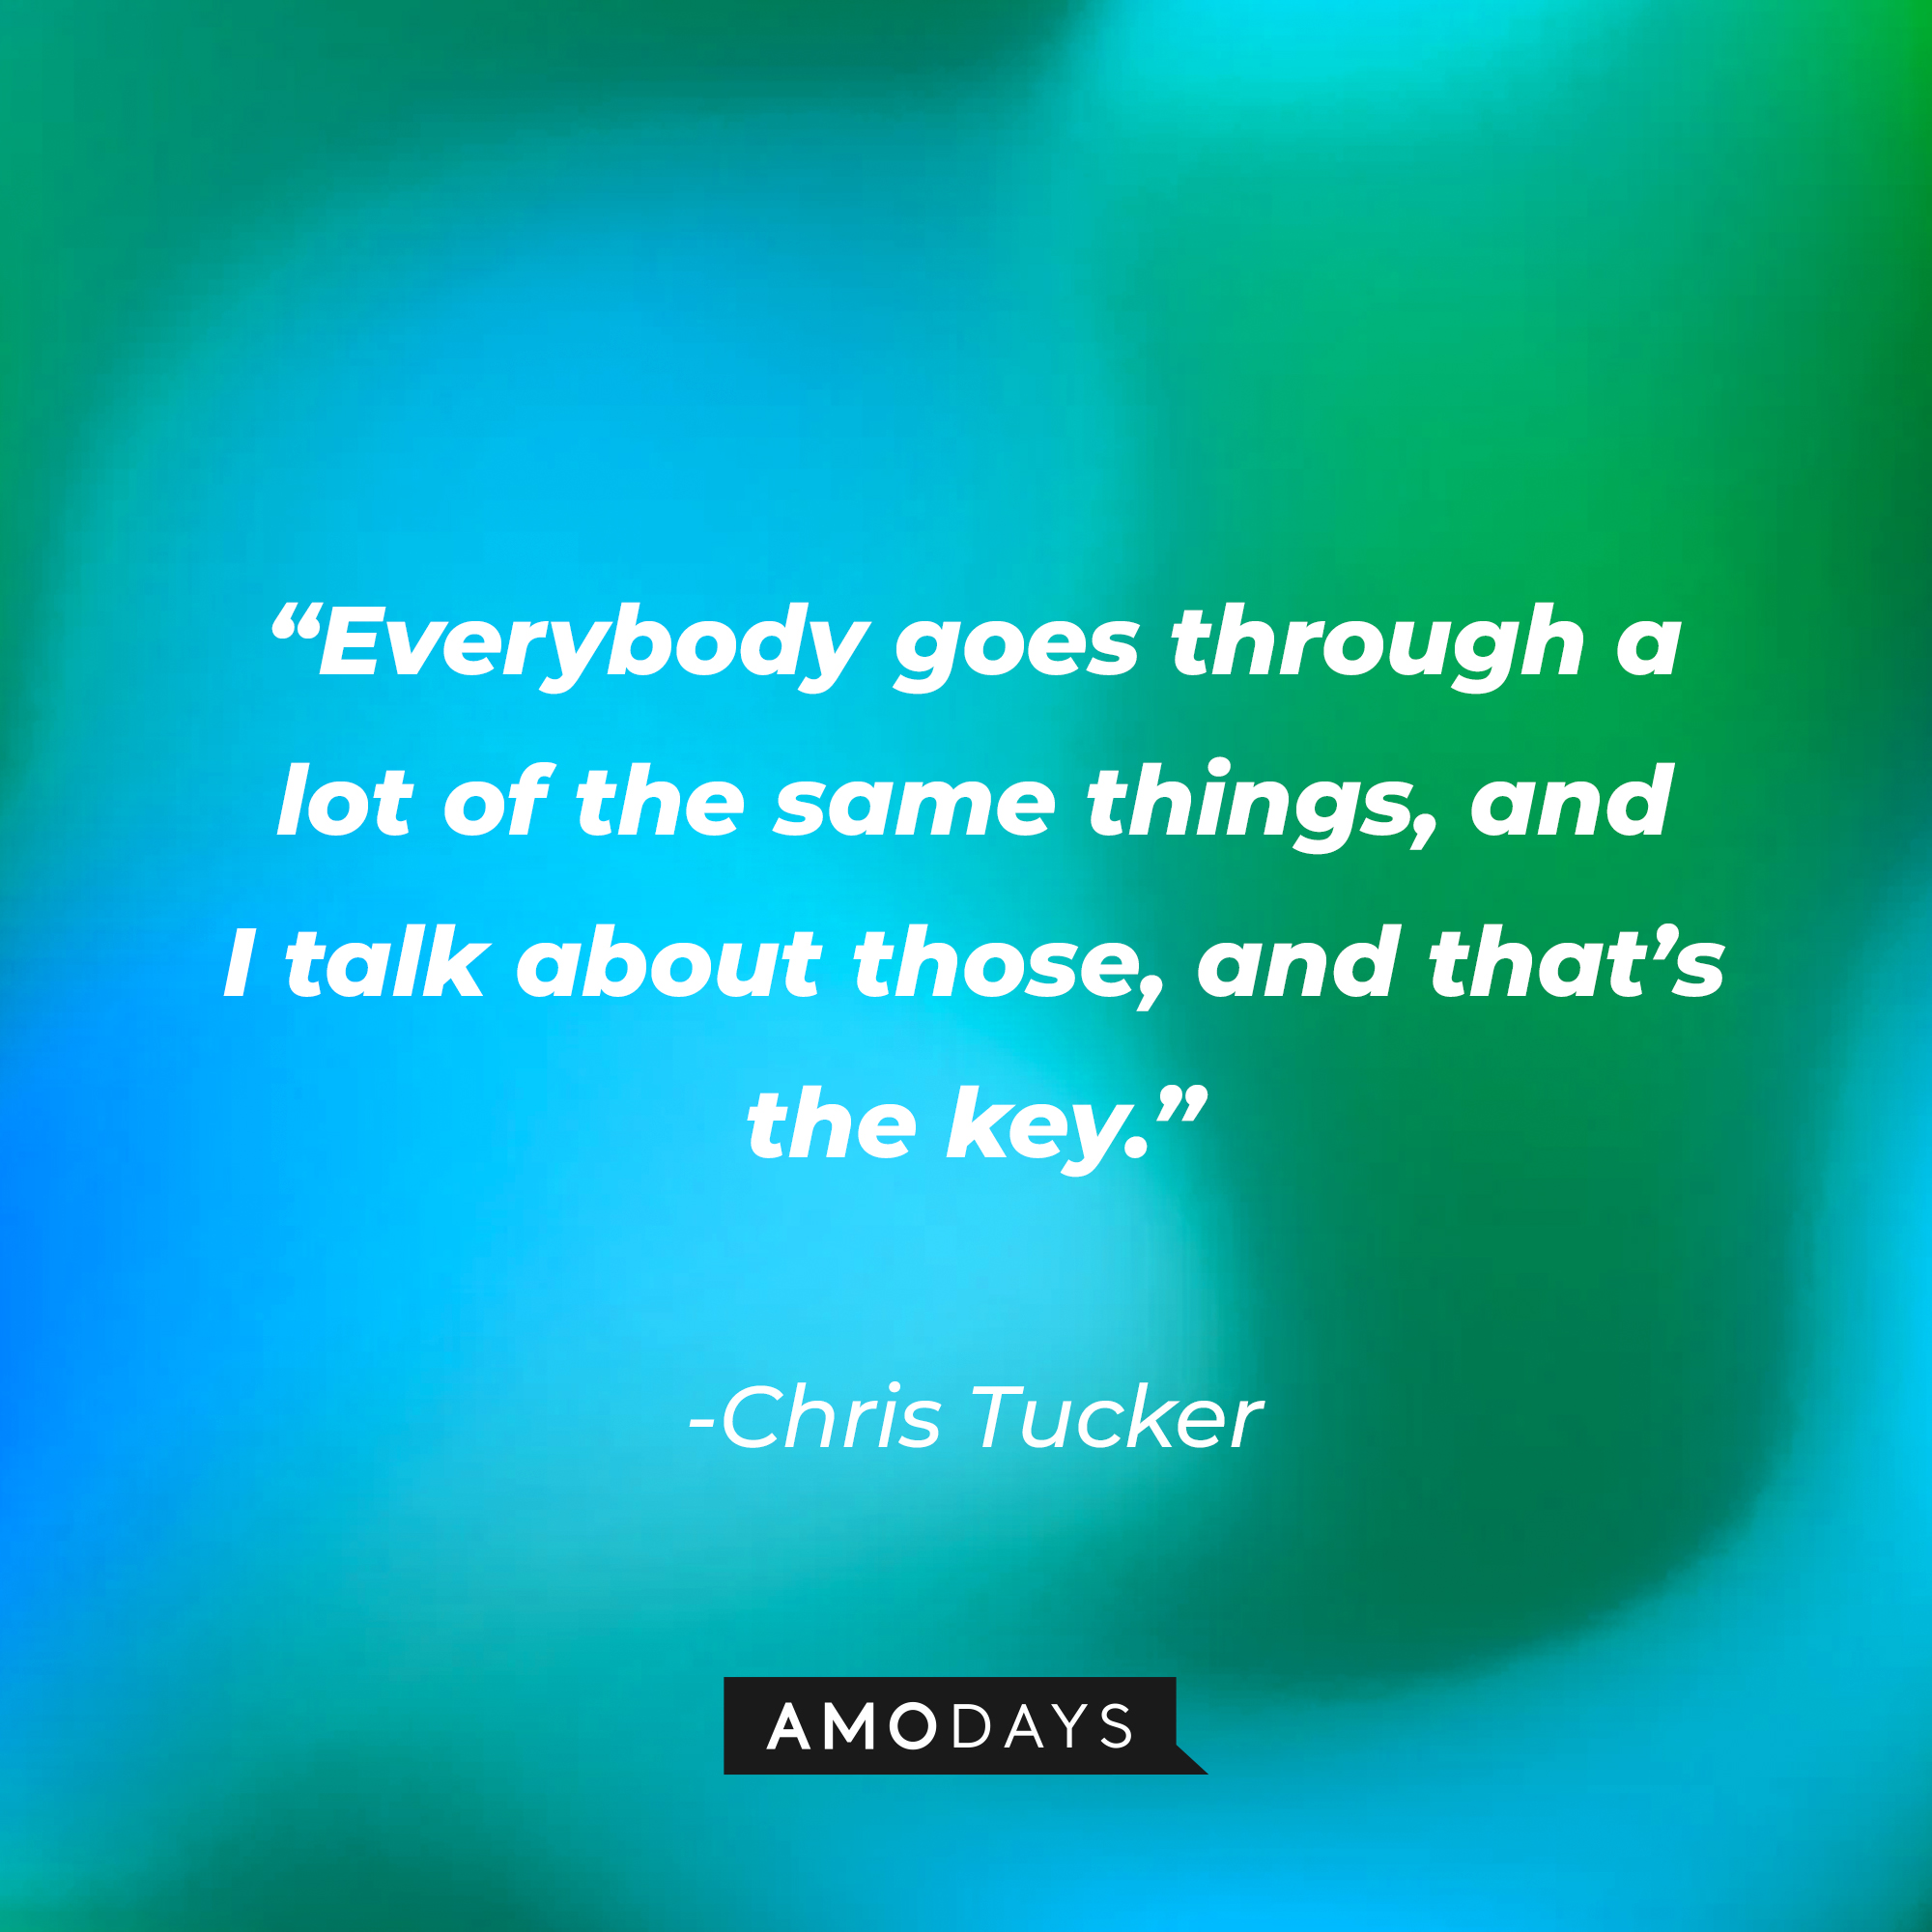 Chris Tucker’s quote: “Everybody goes through a lot of the same things, and I talk about those, and that’s the key.”┃Source: AmoDays